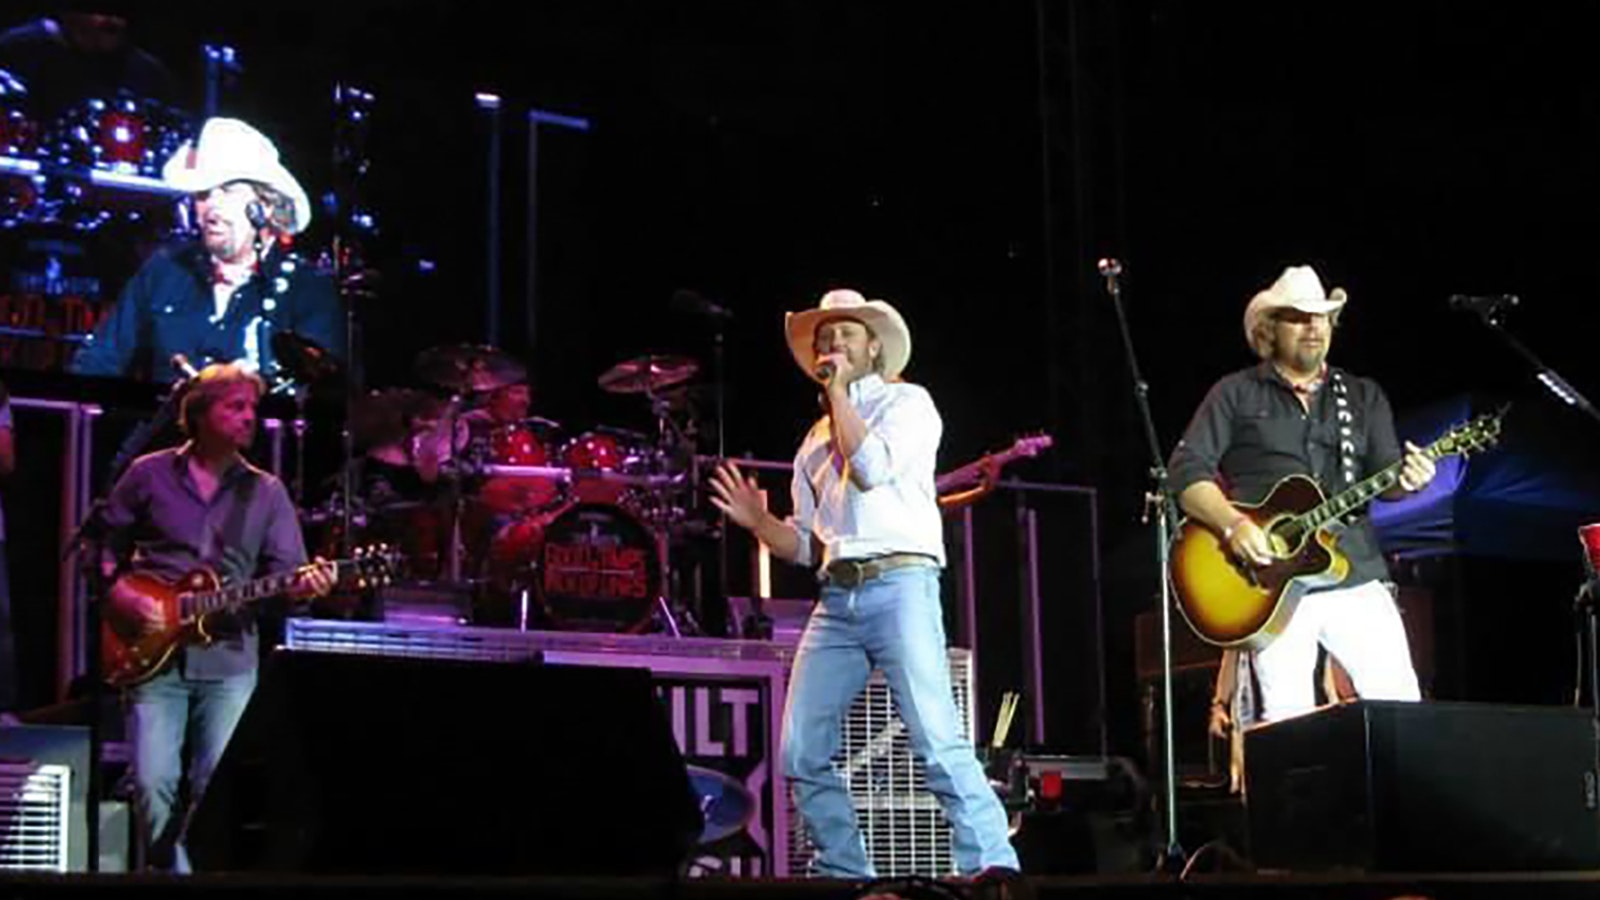 Country music stars Chancey Williams, left, and Toby Keith perform Keith's smash hit "Should've Been a Cowboy" at Cheyenne Frontier Days.